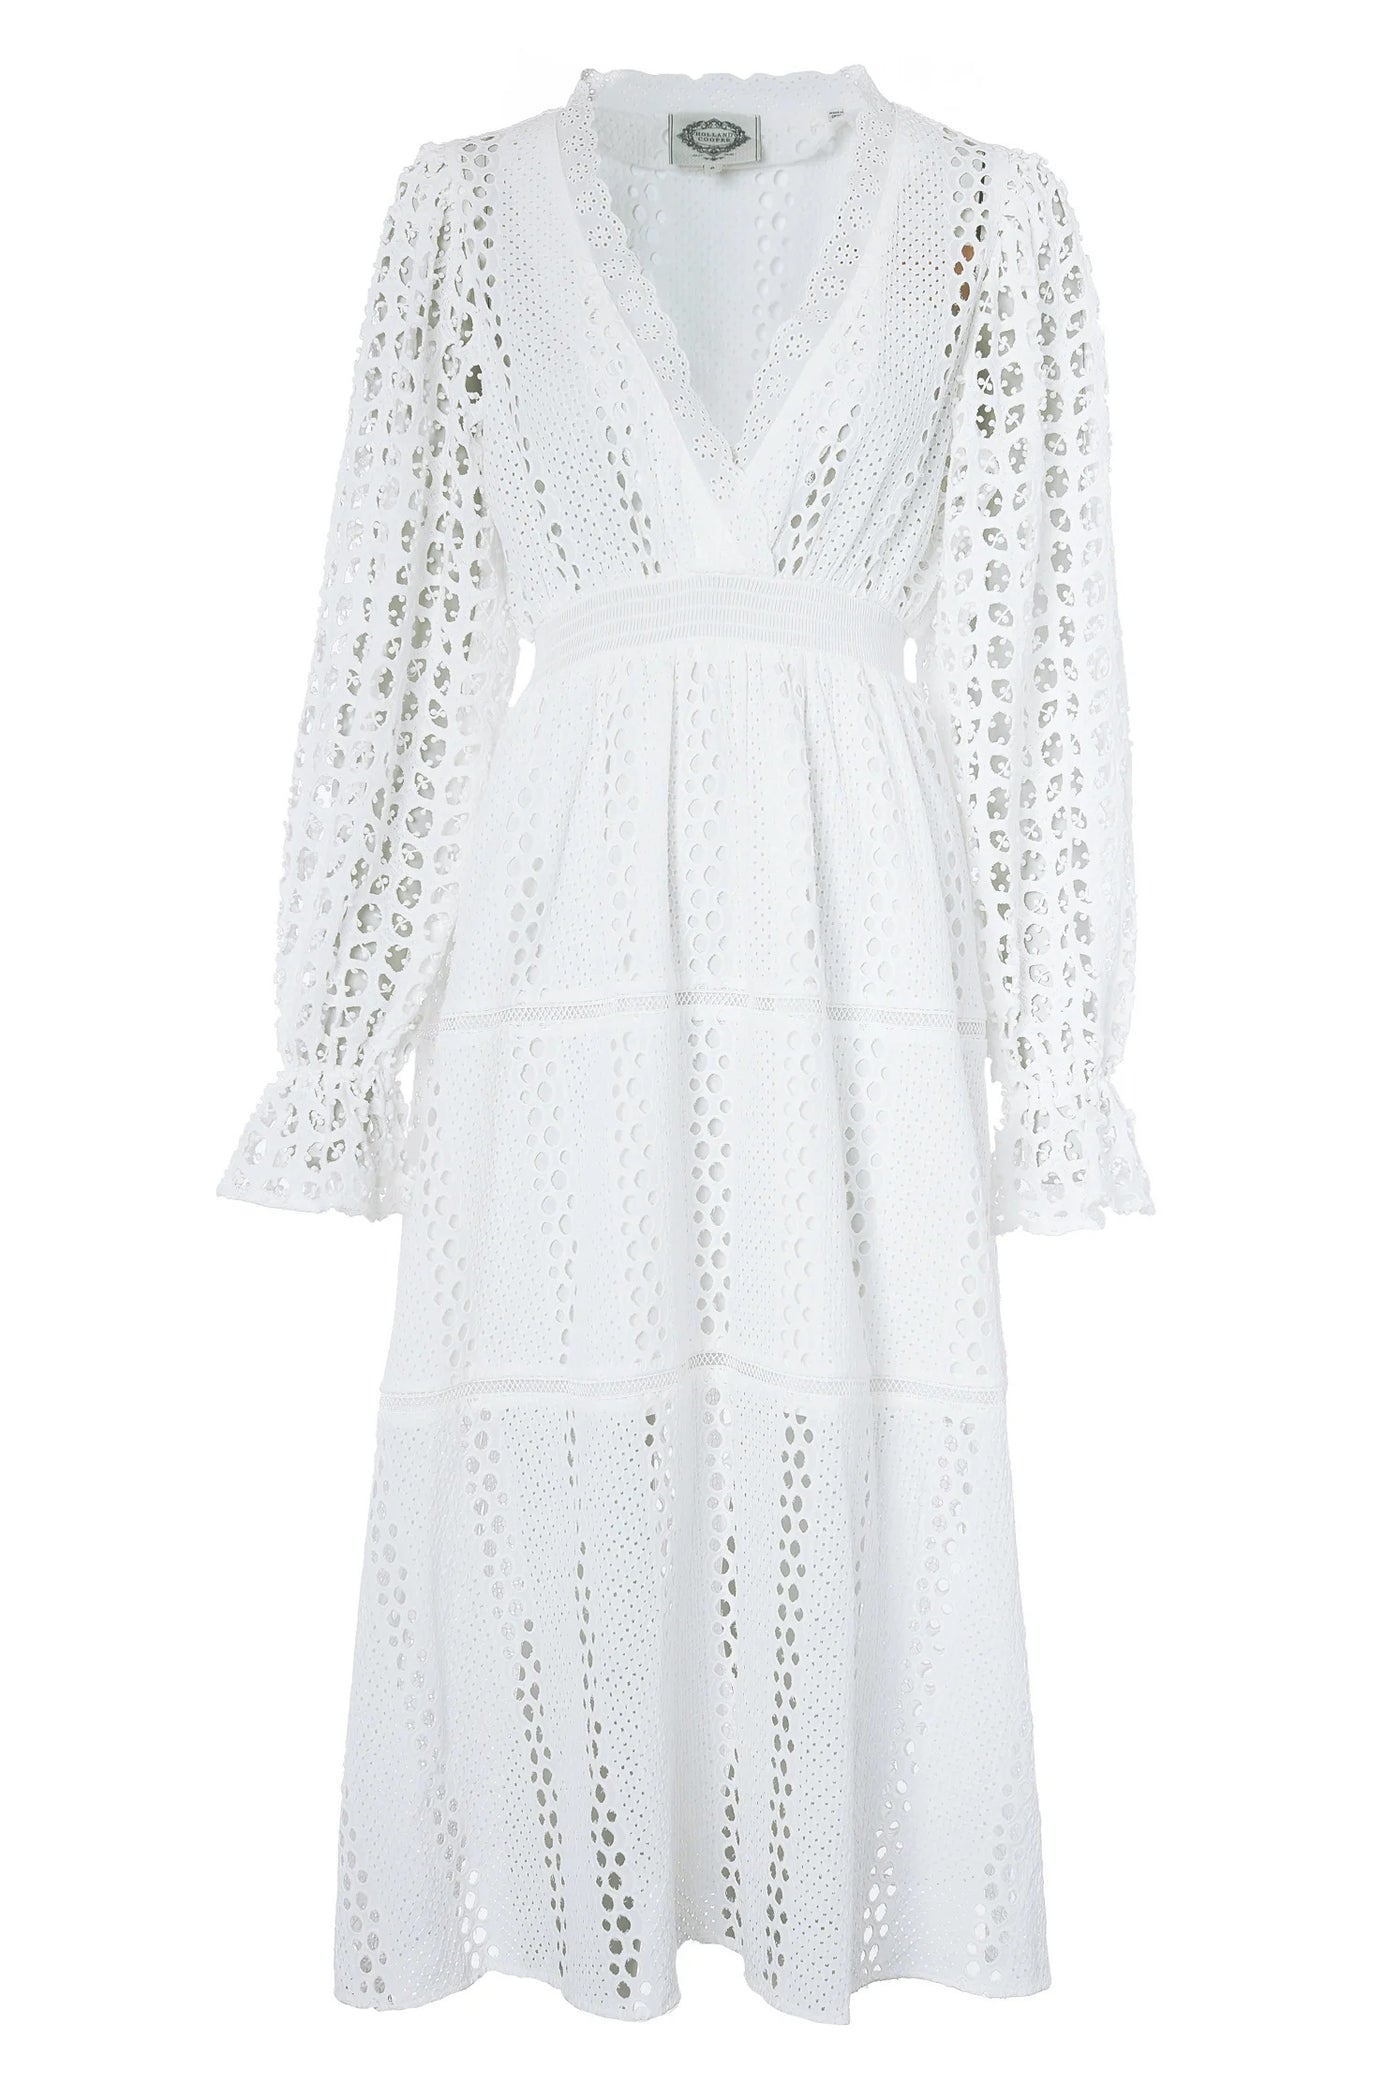 Holland Cooper Broderie Lace V Neck Midi Dress in White Front